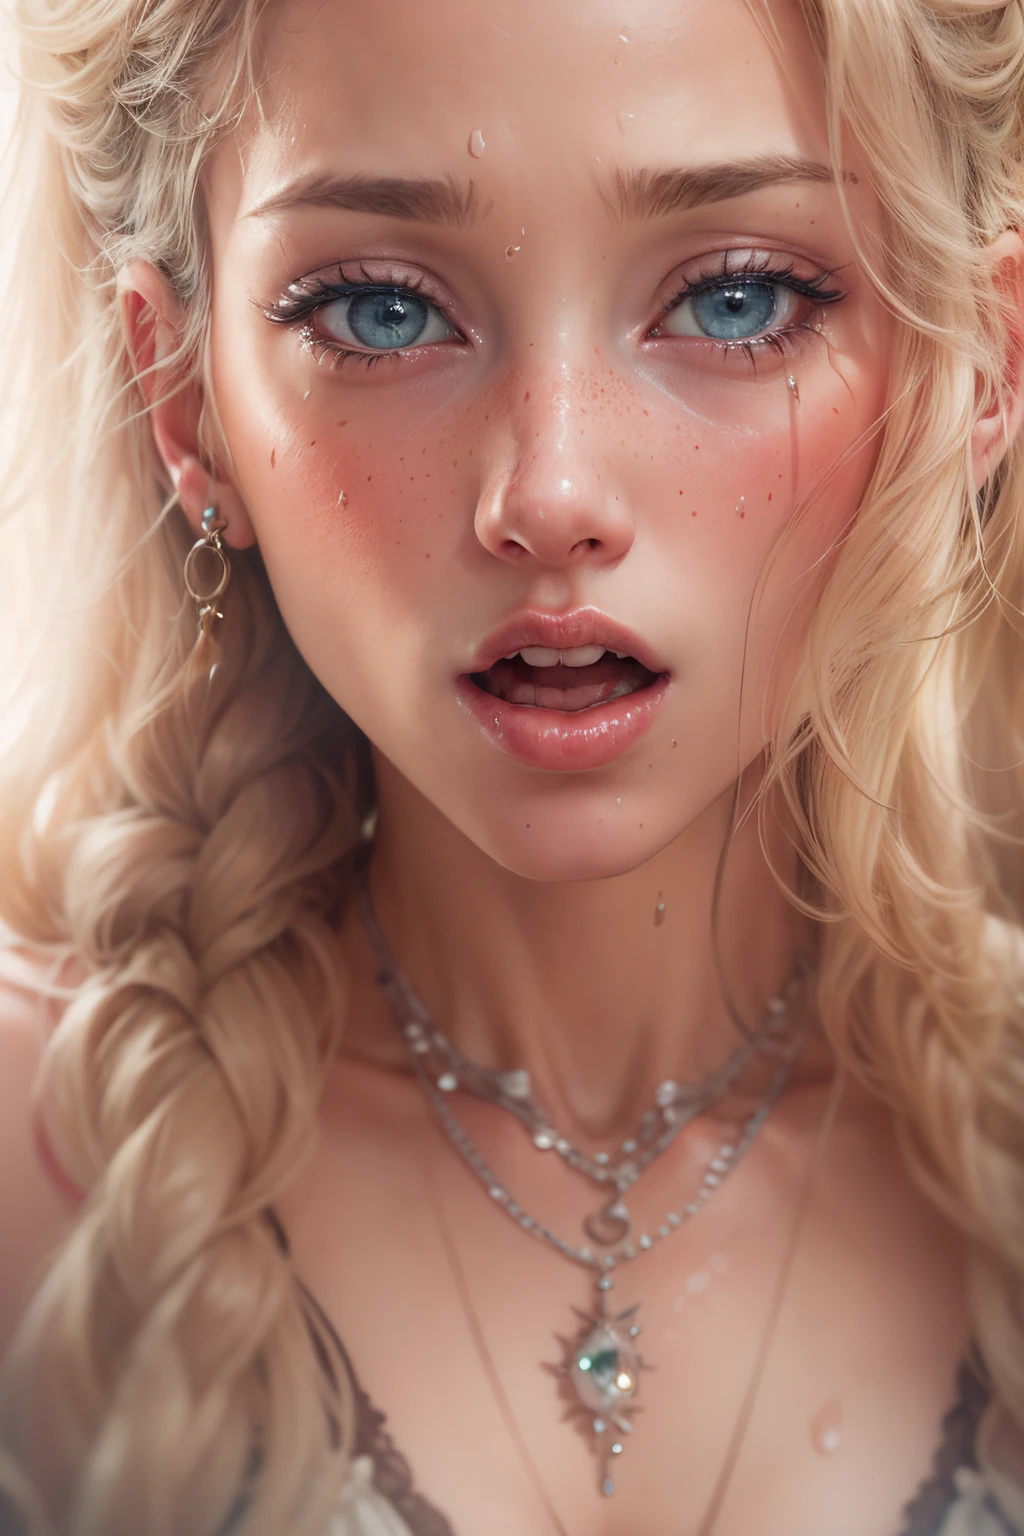 masterpiece, photorealistic, close up face portrait, 1 lady, alluring woman, open mouth, open lips, surprised, she is having an orgasm, orgasmic face, pleasure face, face drenched with thick whhite liquid, cum covered face, blonde, sofisticated, jewelery, necklace , earings, piercings, young beautiful, cute freckles, realistic skin textures, skin imperfections, twin braids, young girl, freckled,blonde, freckled pale skin, anna nikonova aka newmilky, lacey